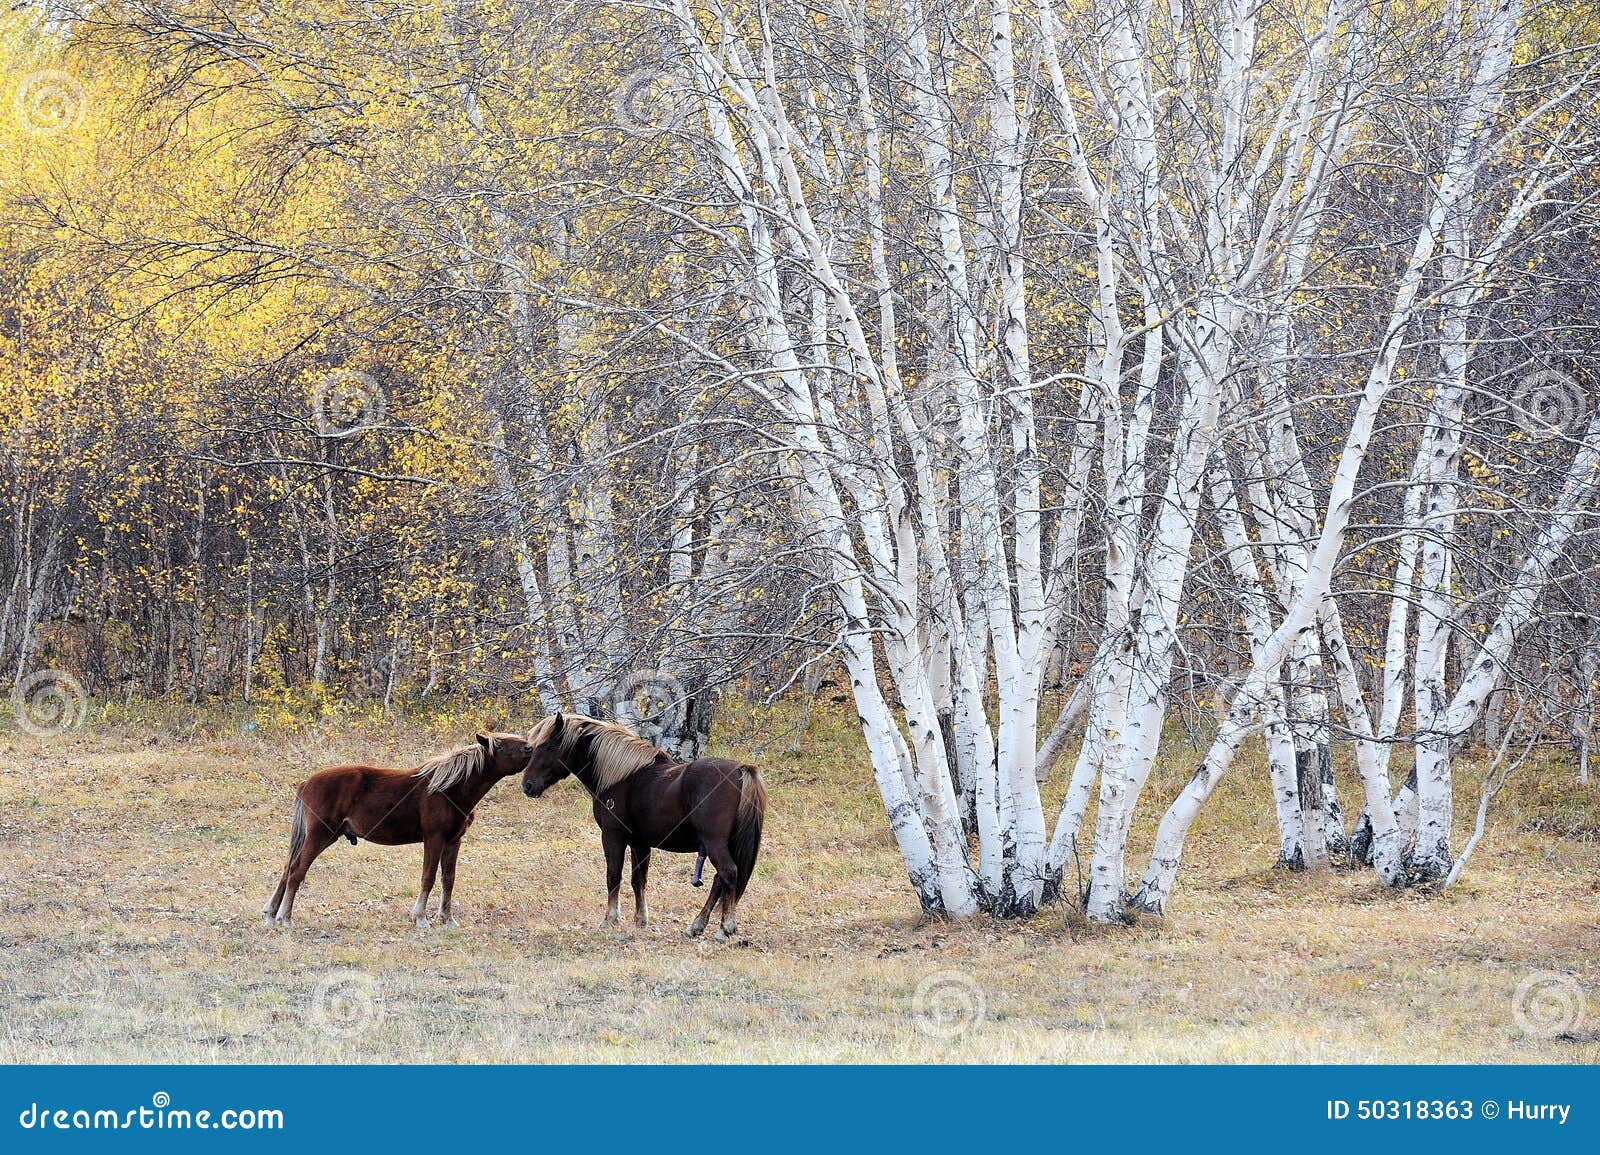 two horses necking beside birch woods in autumn